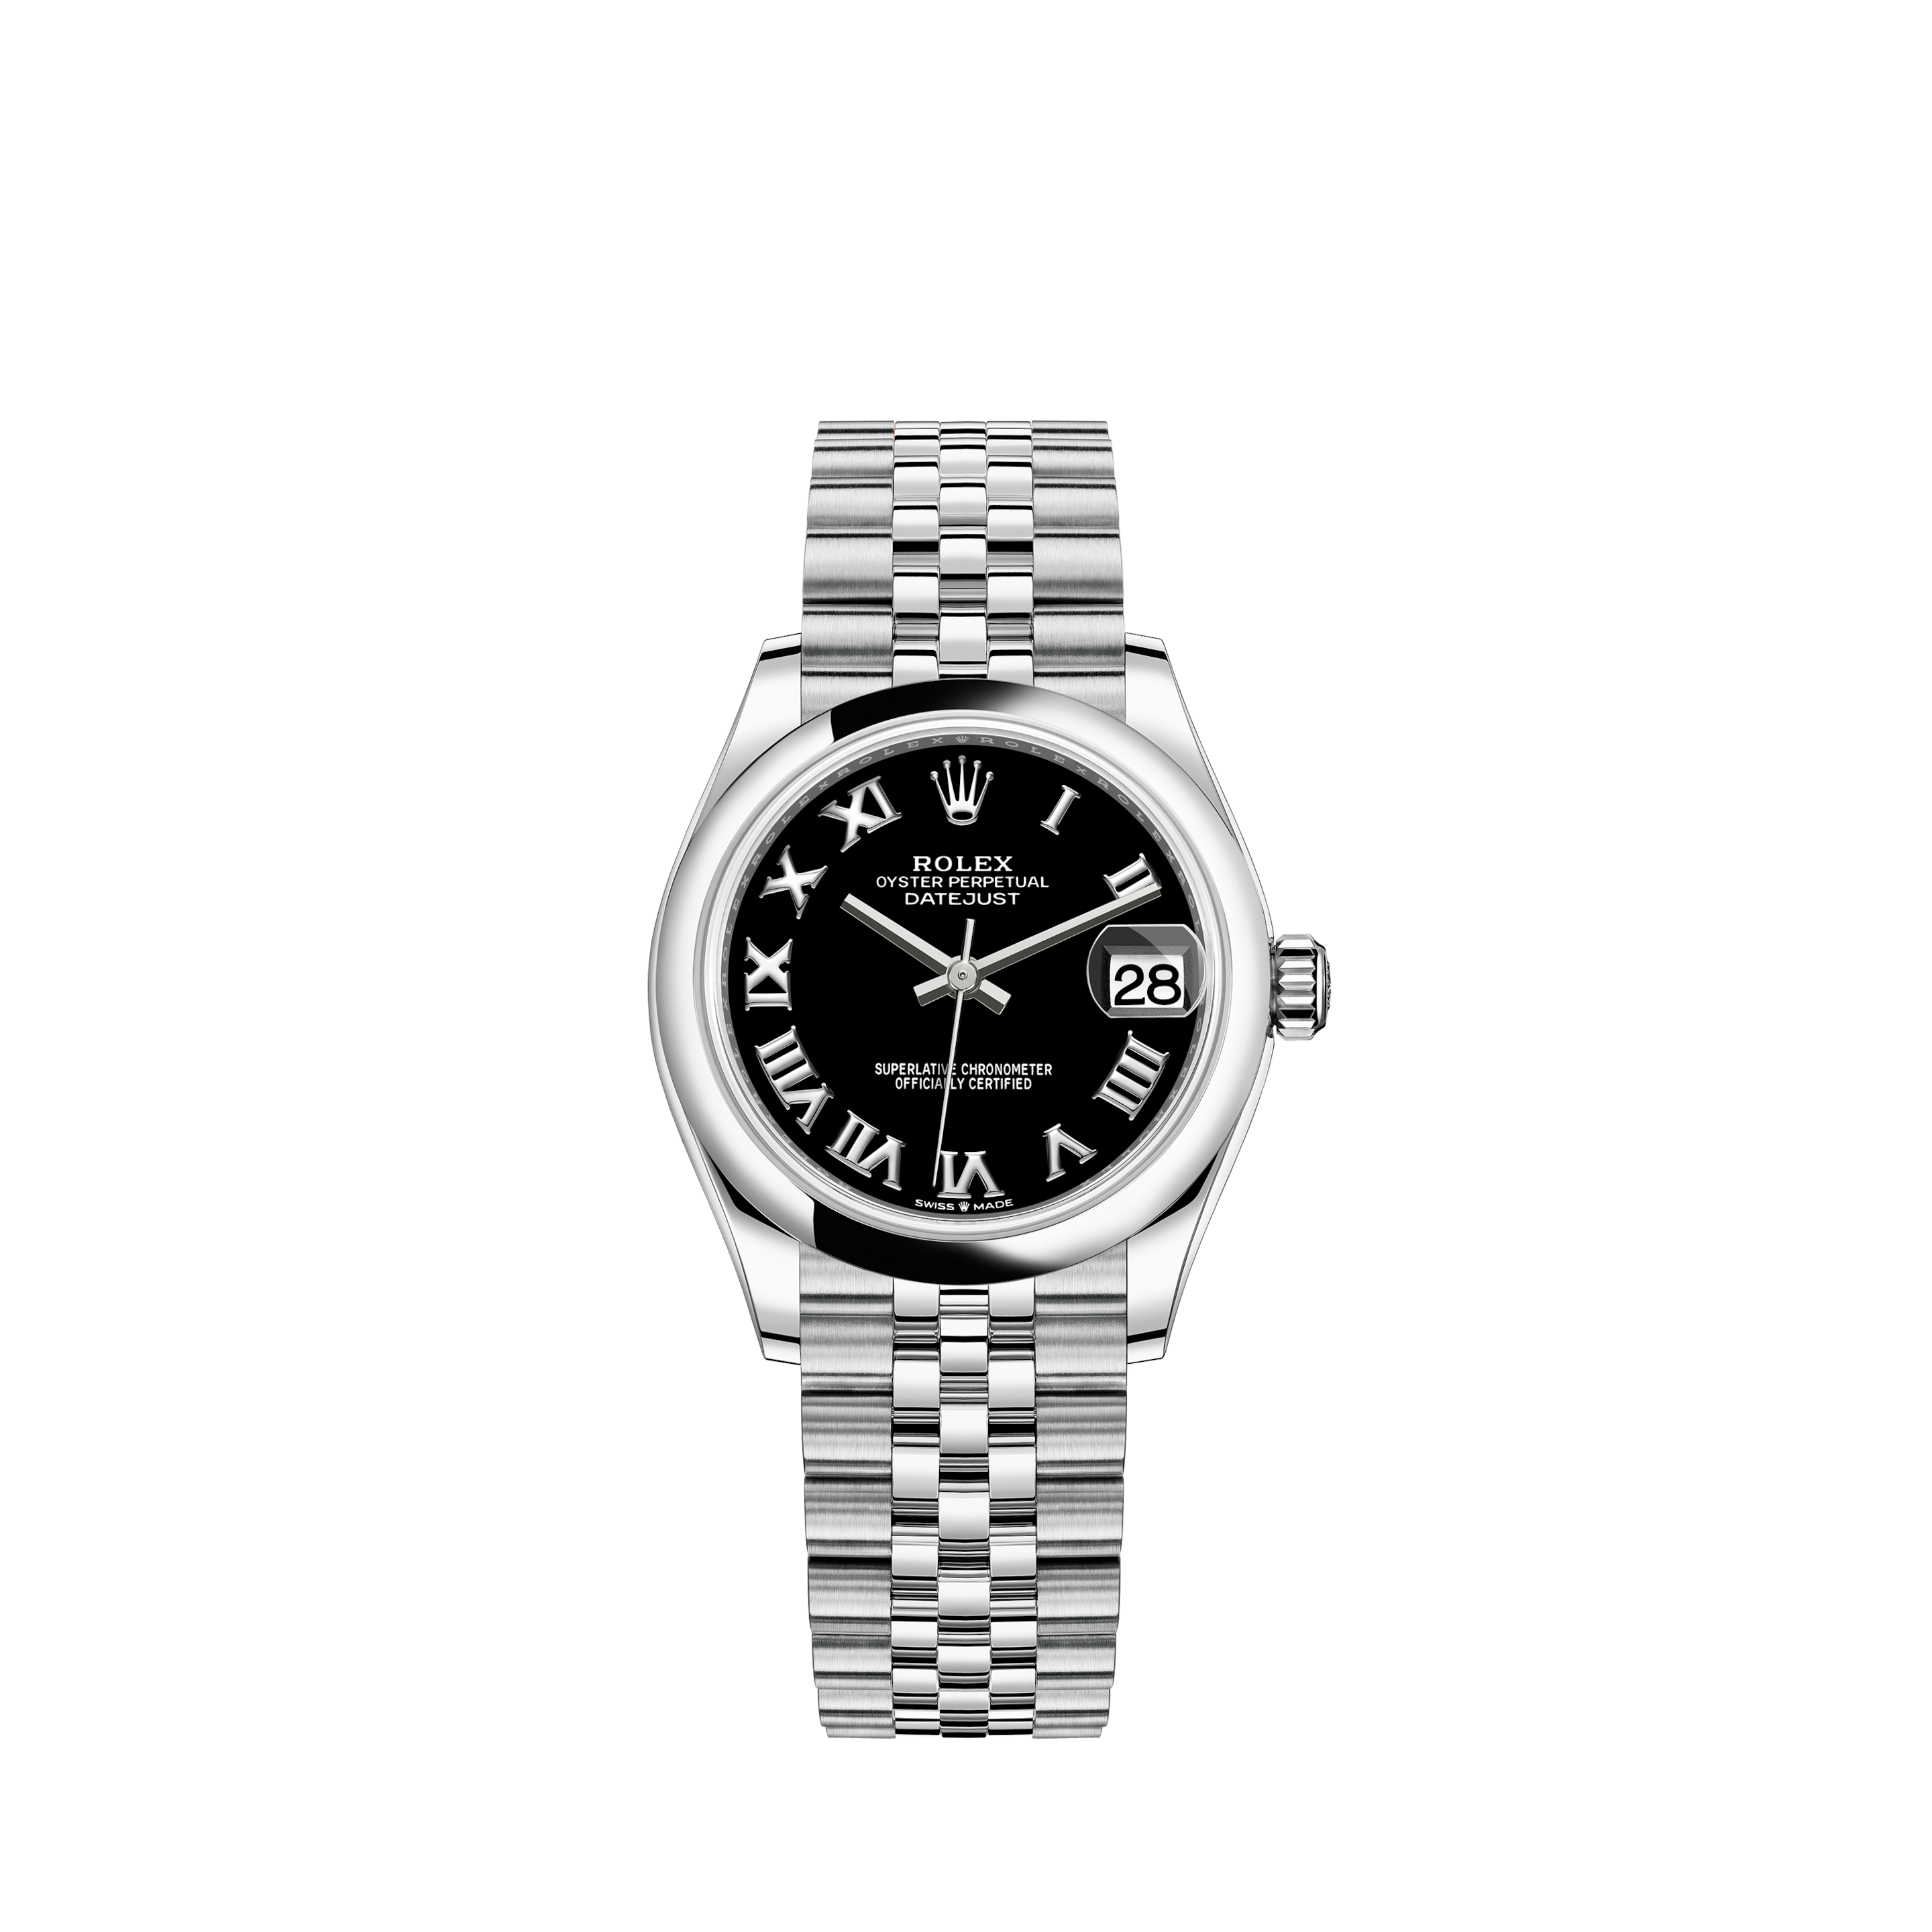 Rolex Lady-Datejust 69173 SERVICED BY ROLEX Black Baton Dial 26mmRolex Lady-Datejust 69173 Silver Diamond Dial Diamond Bezel 26mm W/ BOX AND PAPERS